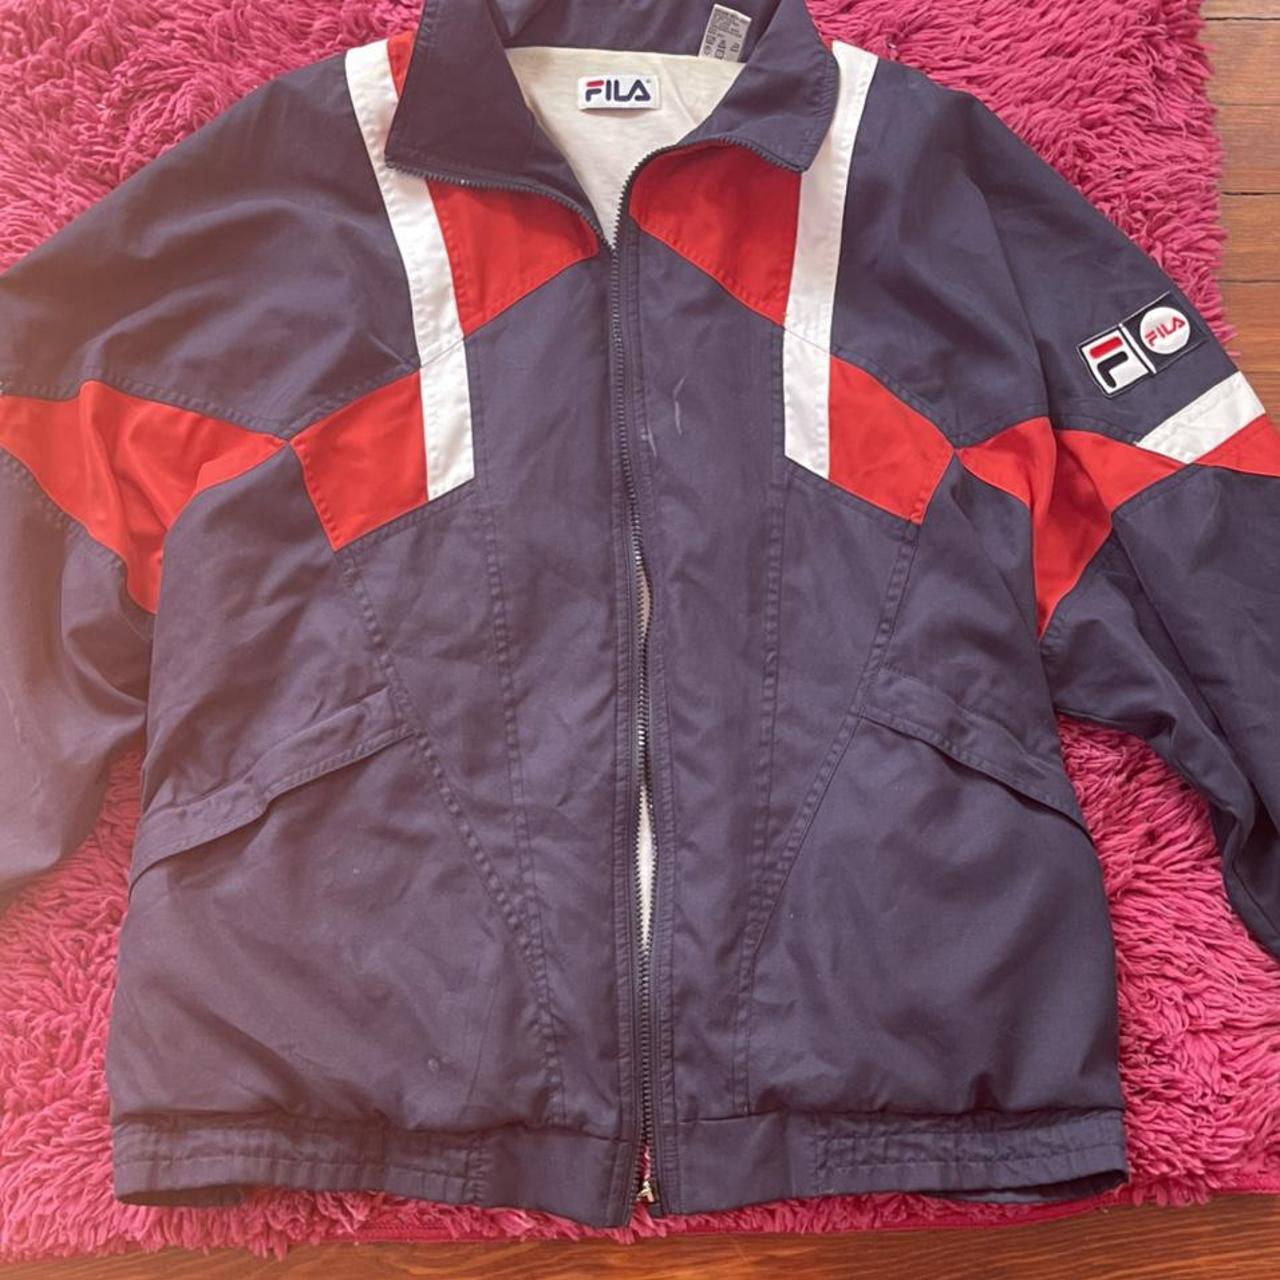 Fila Men's Navy and Red Jacket